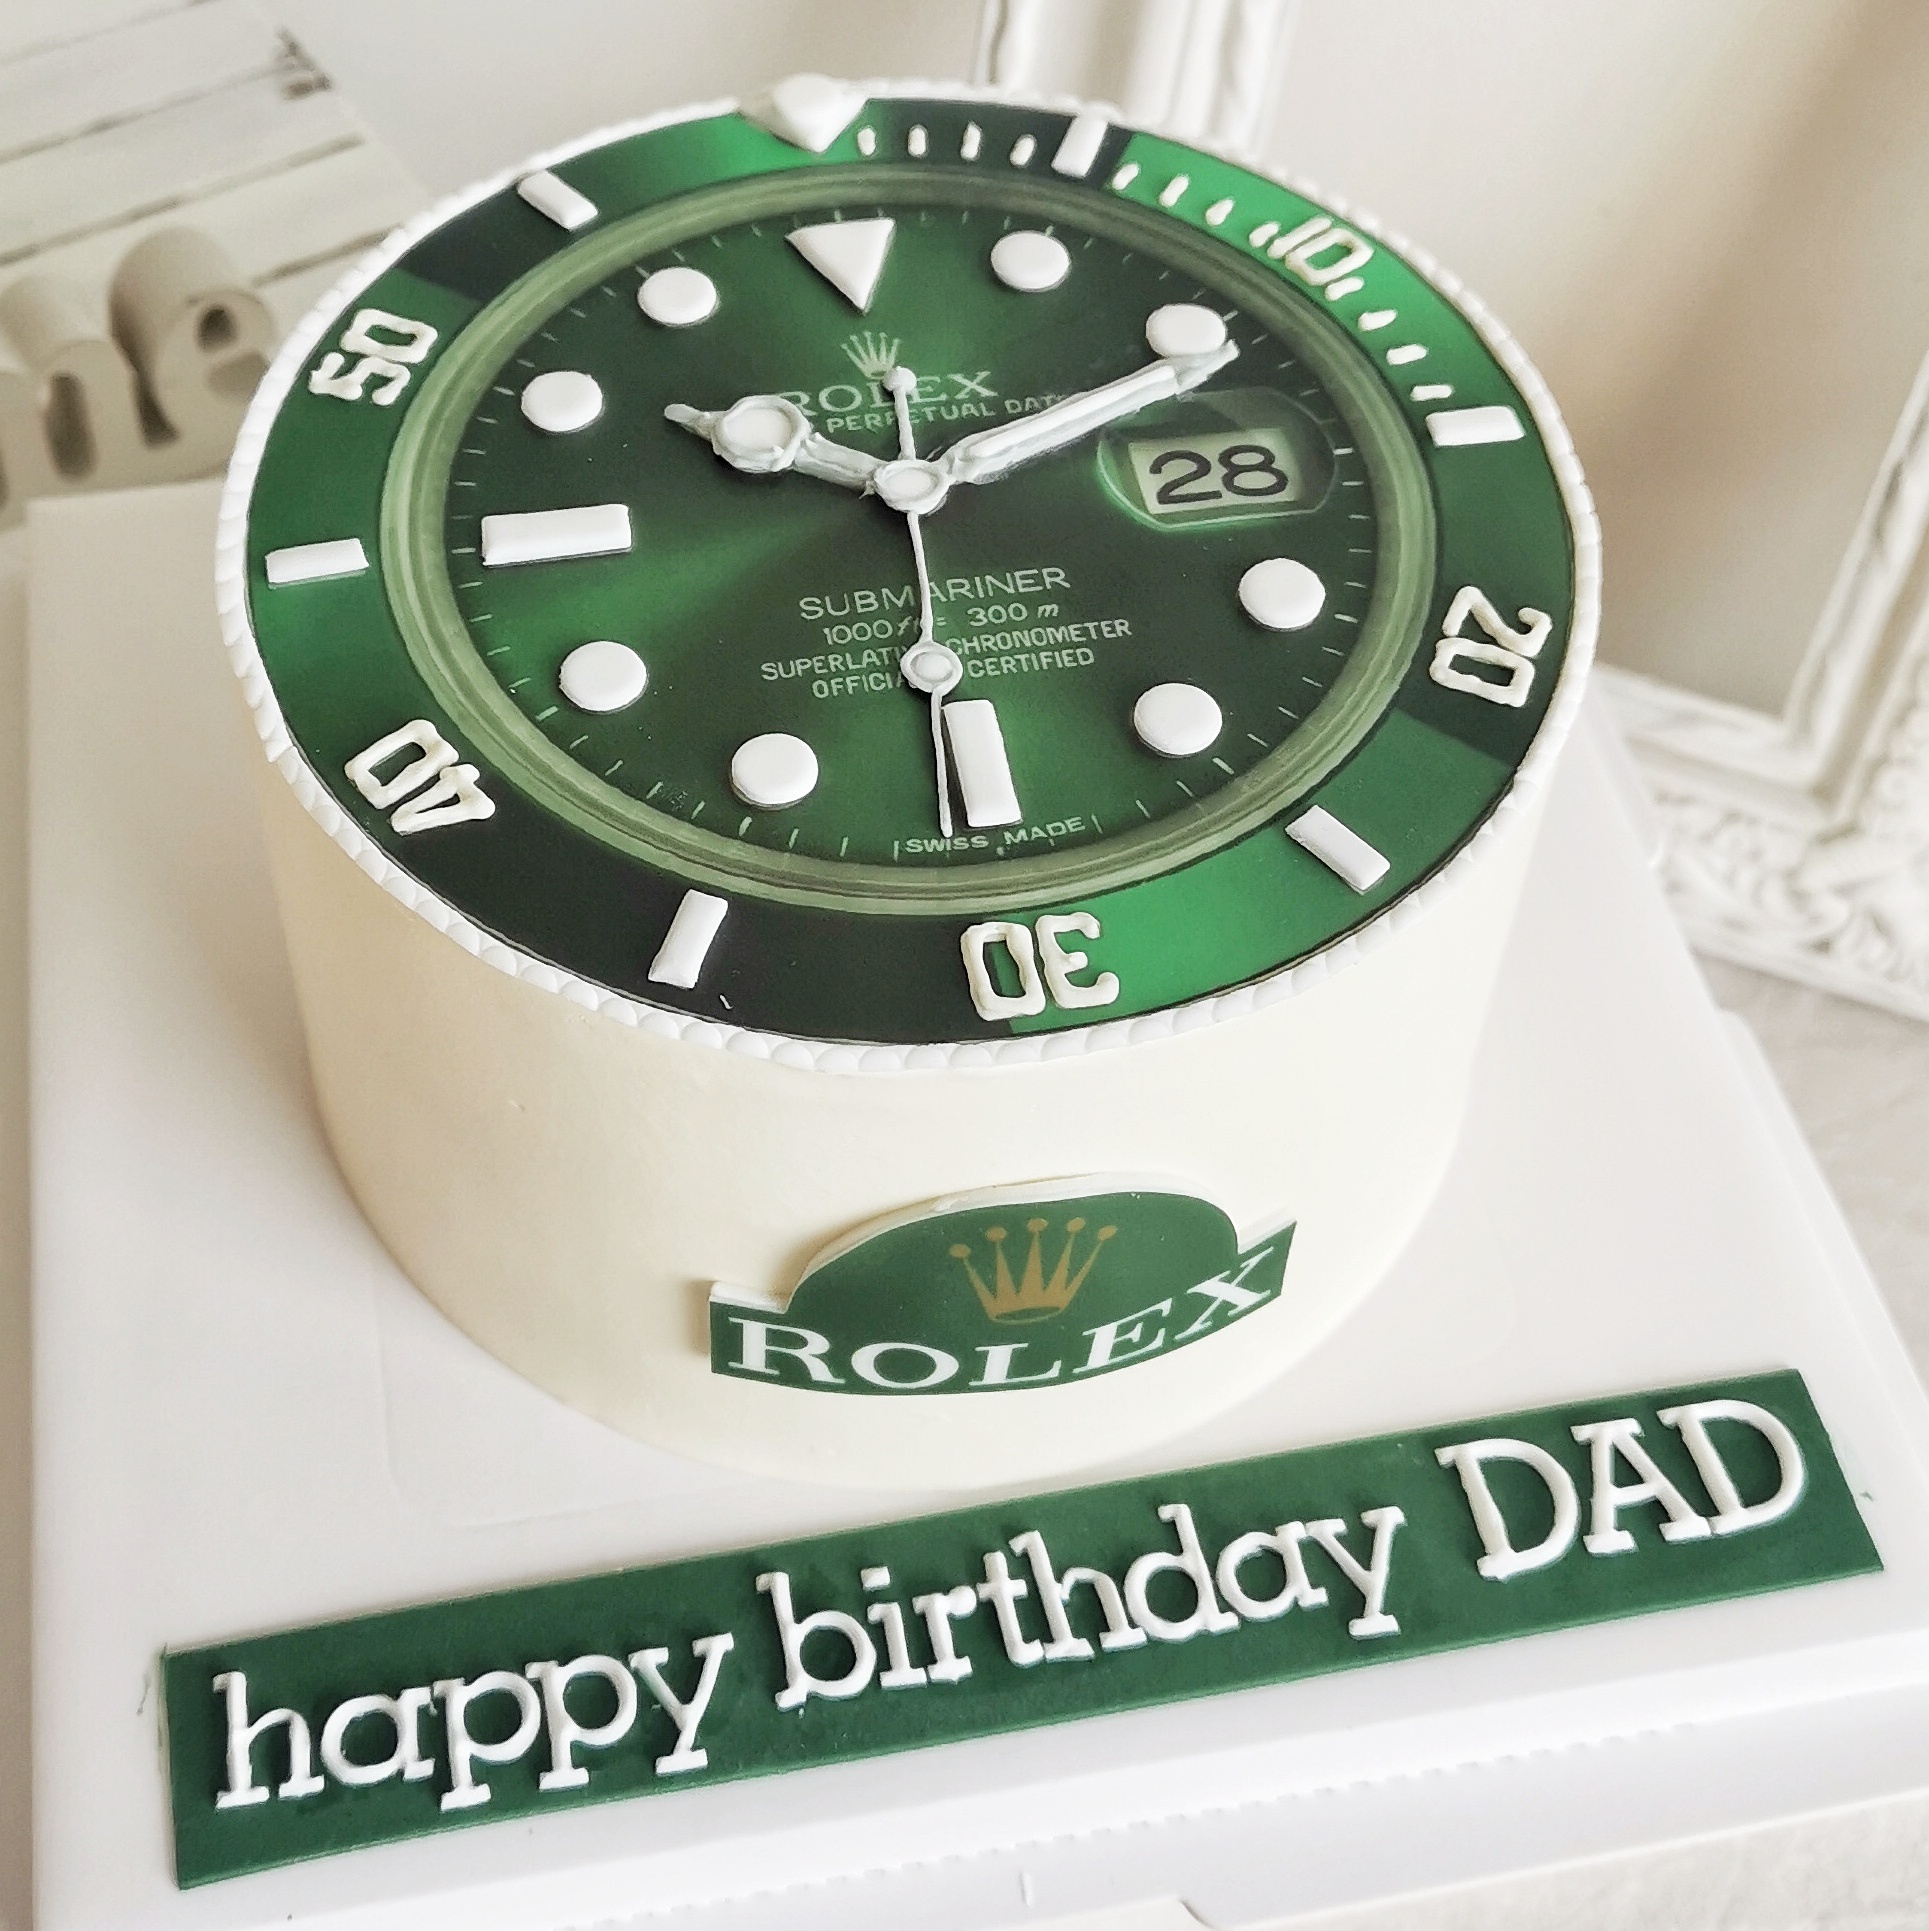 Gold Blue Faced Rolex Watch in a Box Birthday Cake | Susie's Cakes